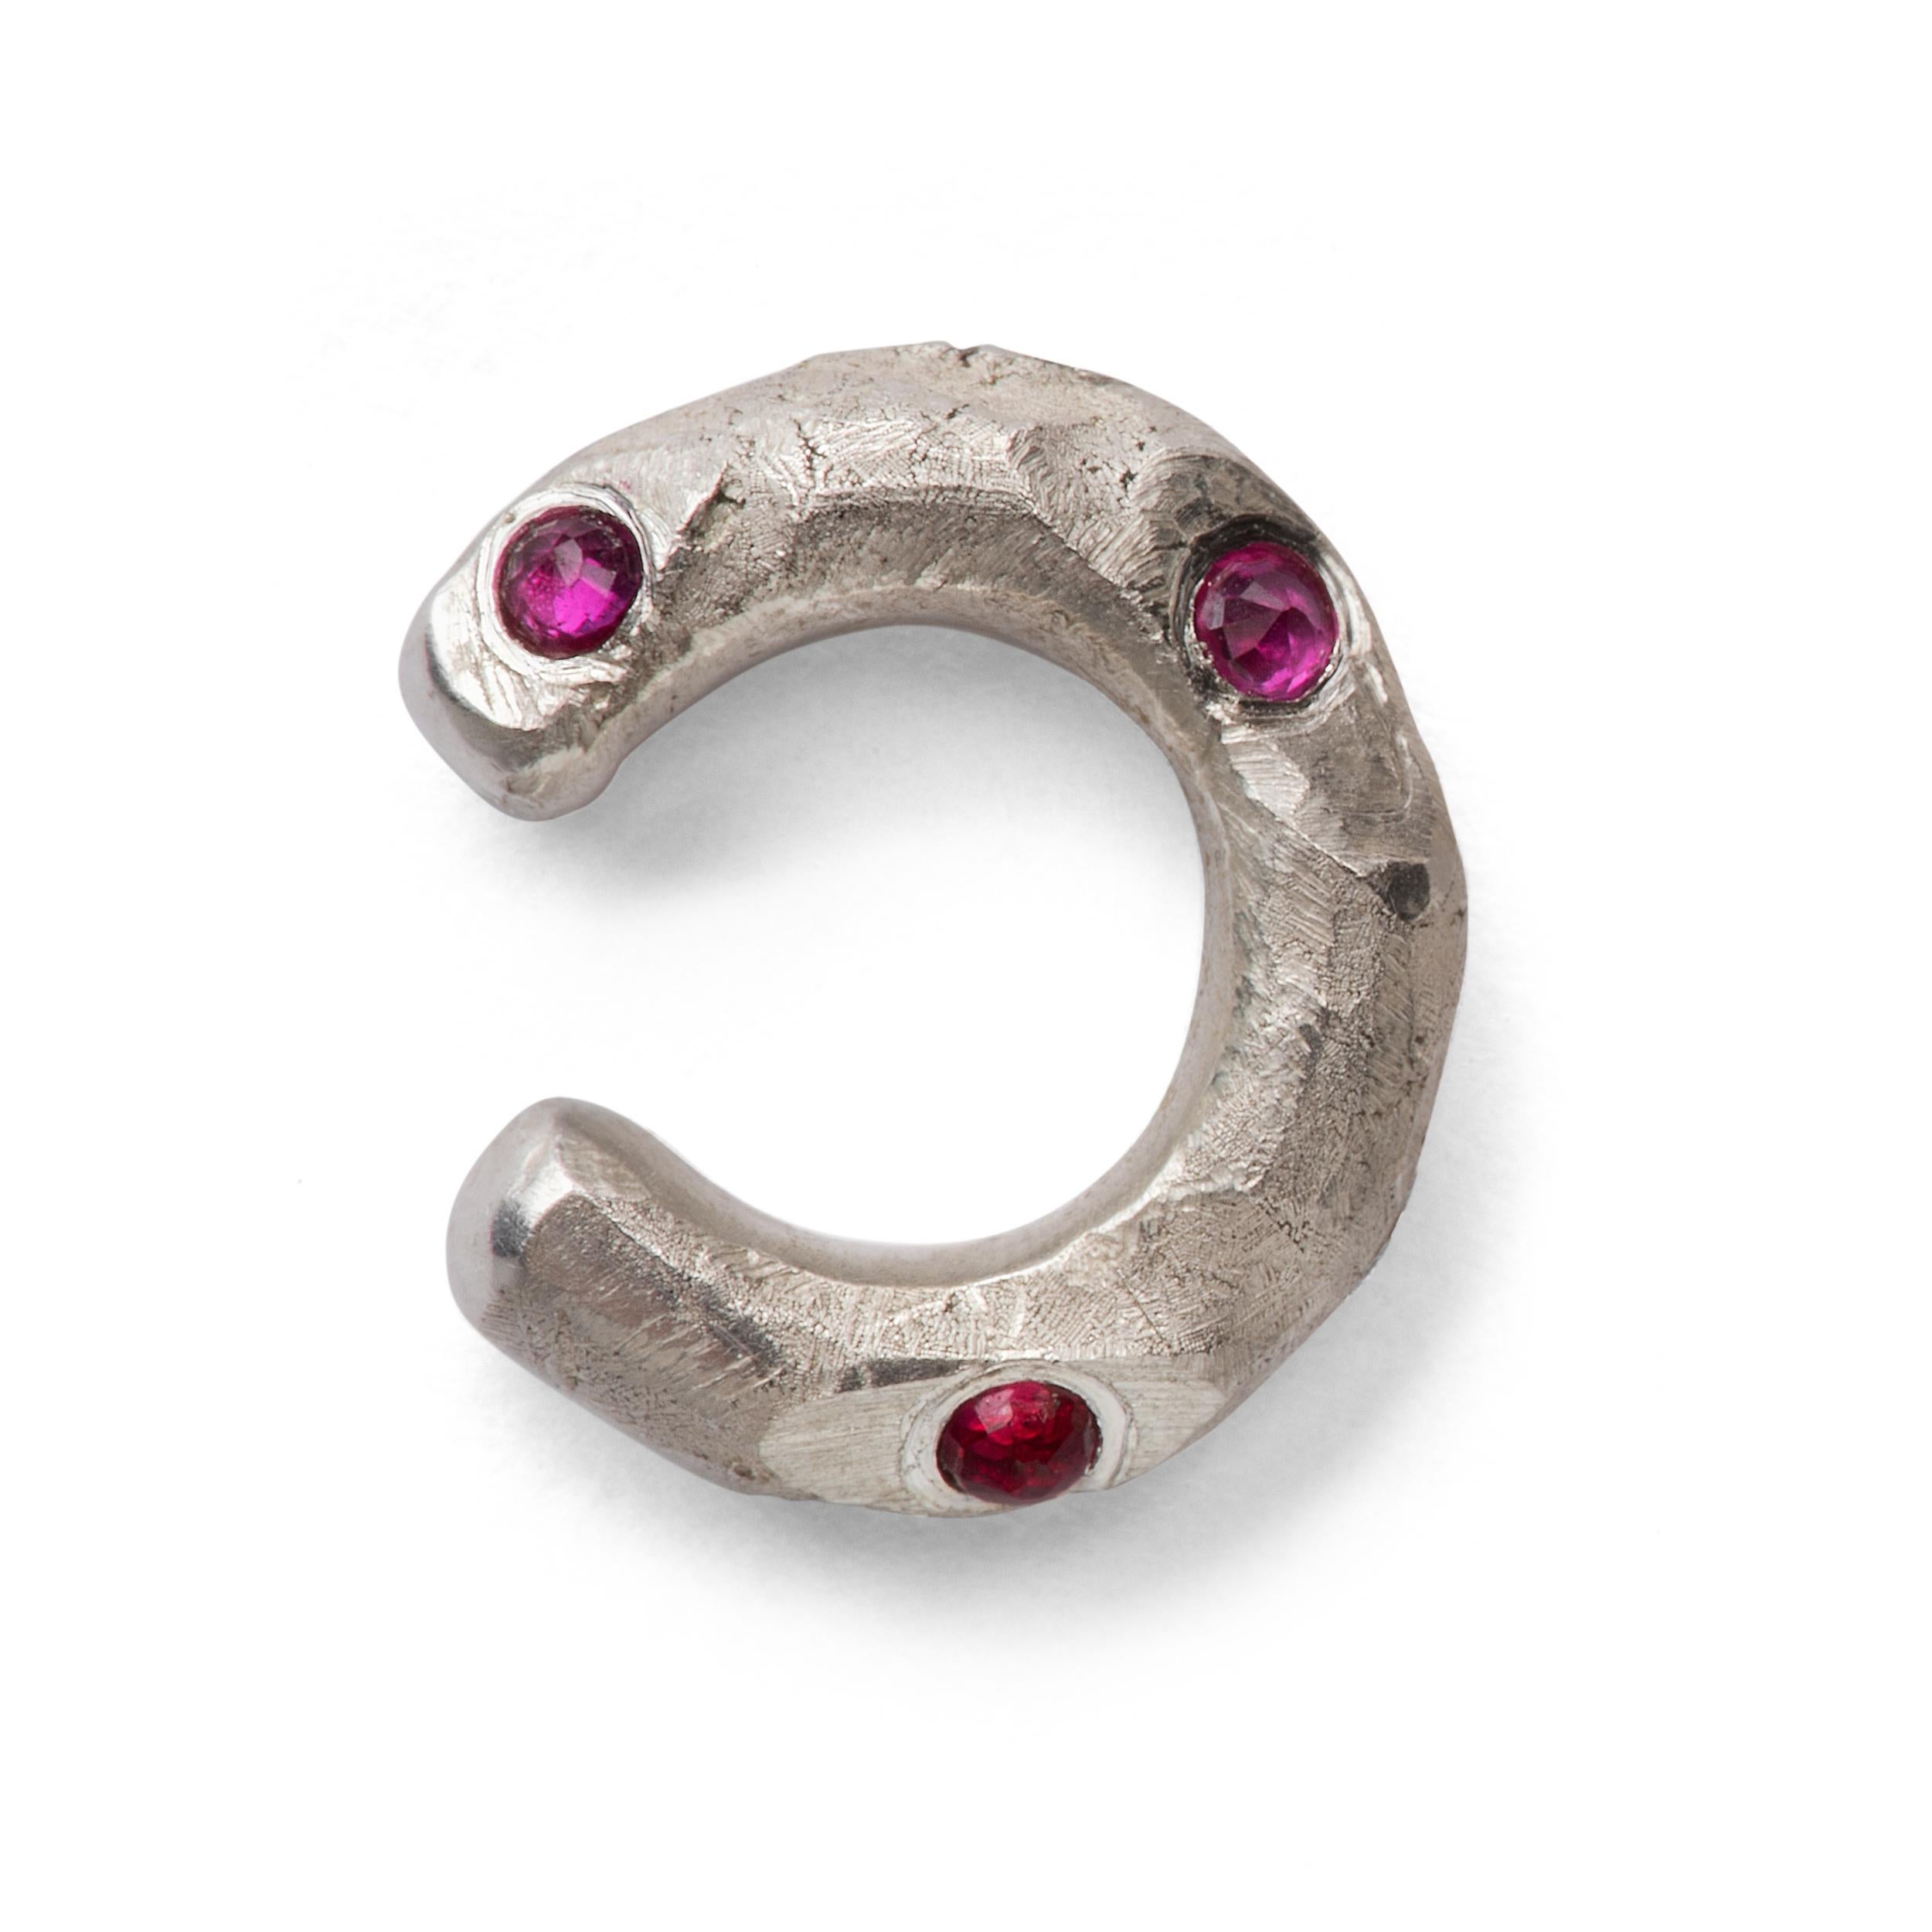 Sterling silver ear cuff 18mm diameter with a high polished interior and textured exterior, studded with inverted brilliant cut 1.5mm rubies. Made from one branch of a silver tree that was constructed in wax and cast, with the buds cut off,